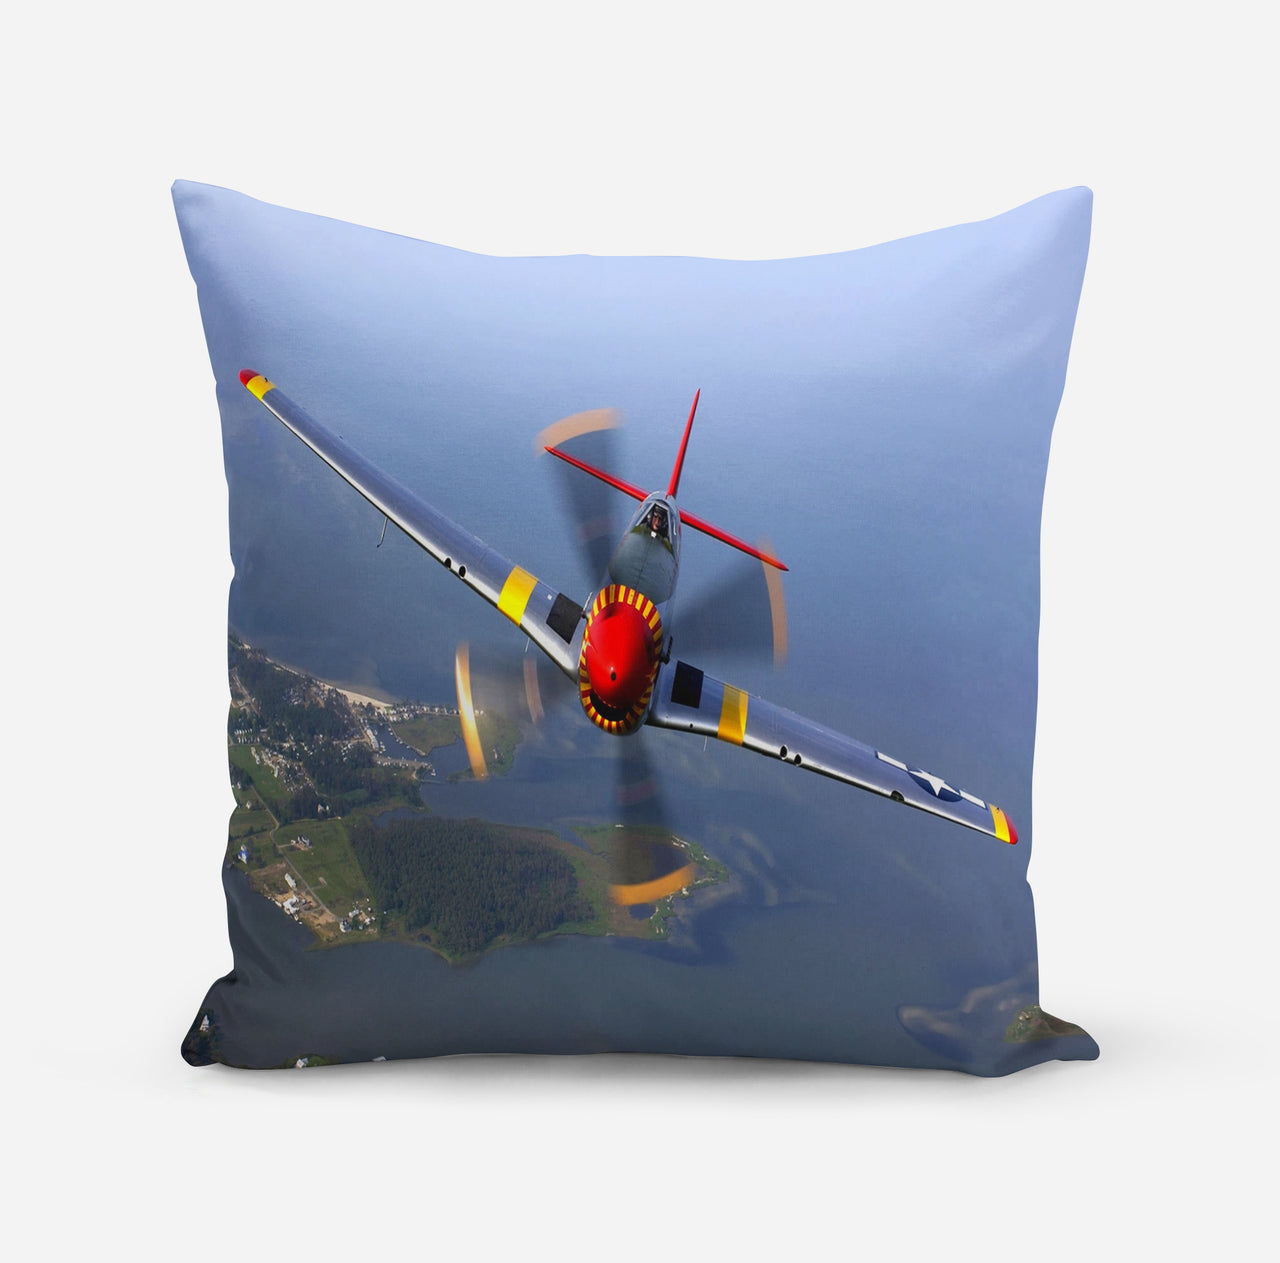 Face to Face Amazing Propeller Designed Pillows